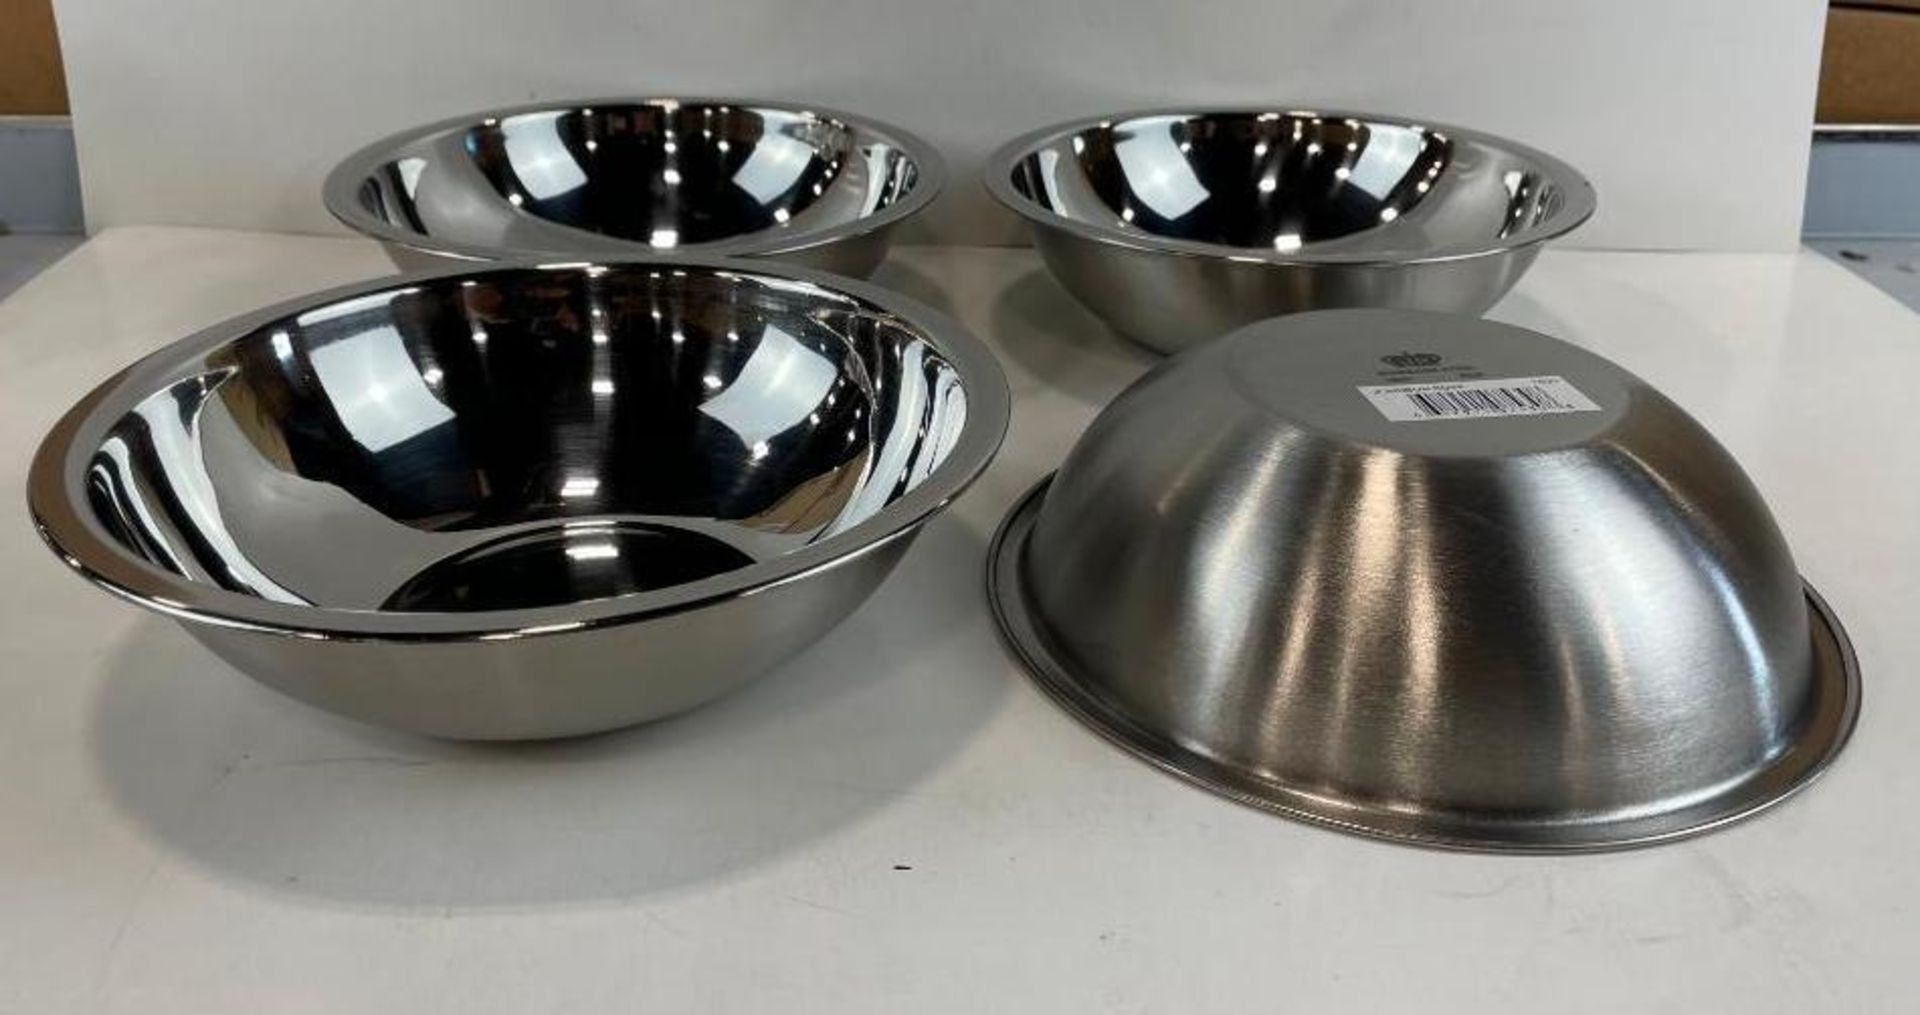 HEAVY DUTY STAINLESS STEEL MIXING BOWL 1 QT - LOT OF 4 - JOHNSON ROSE 7530 - Image 2 of 5